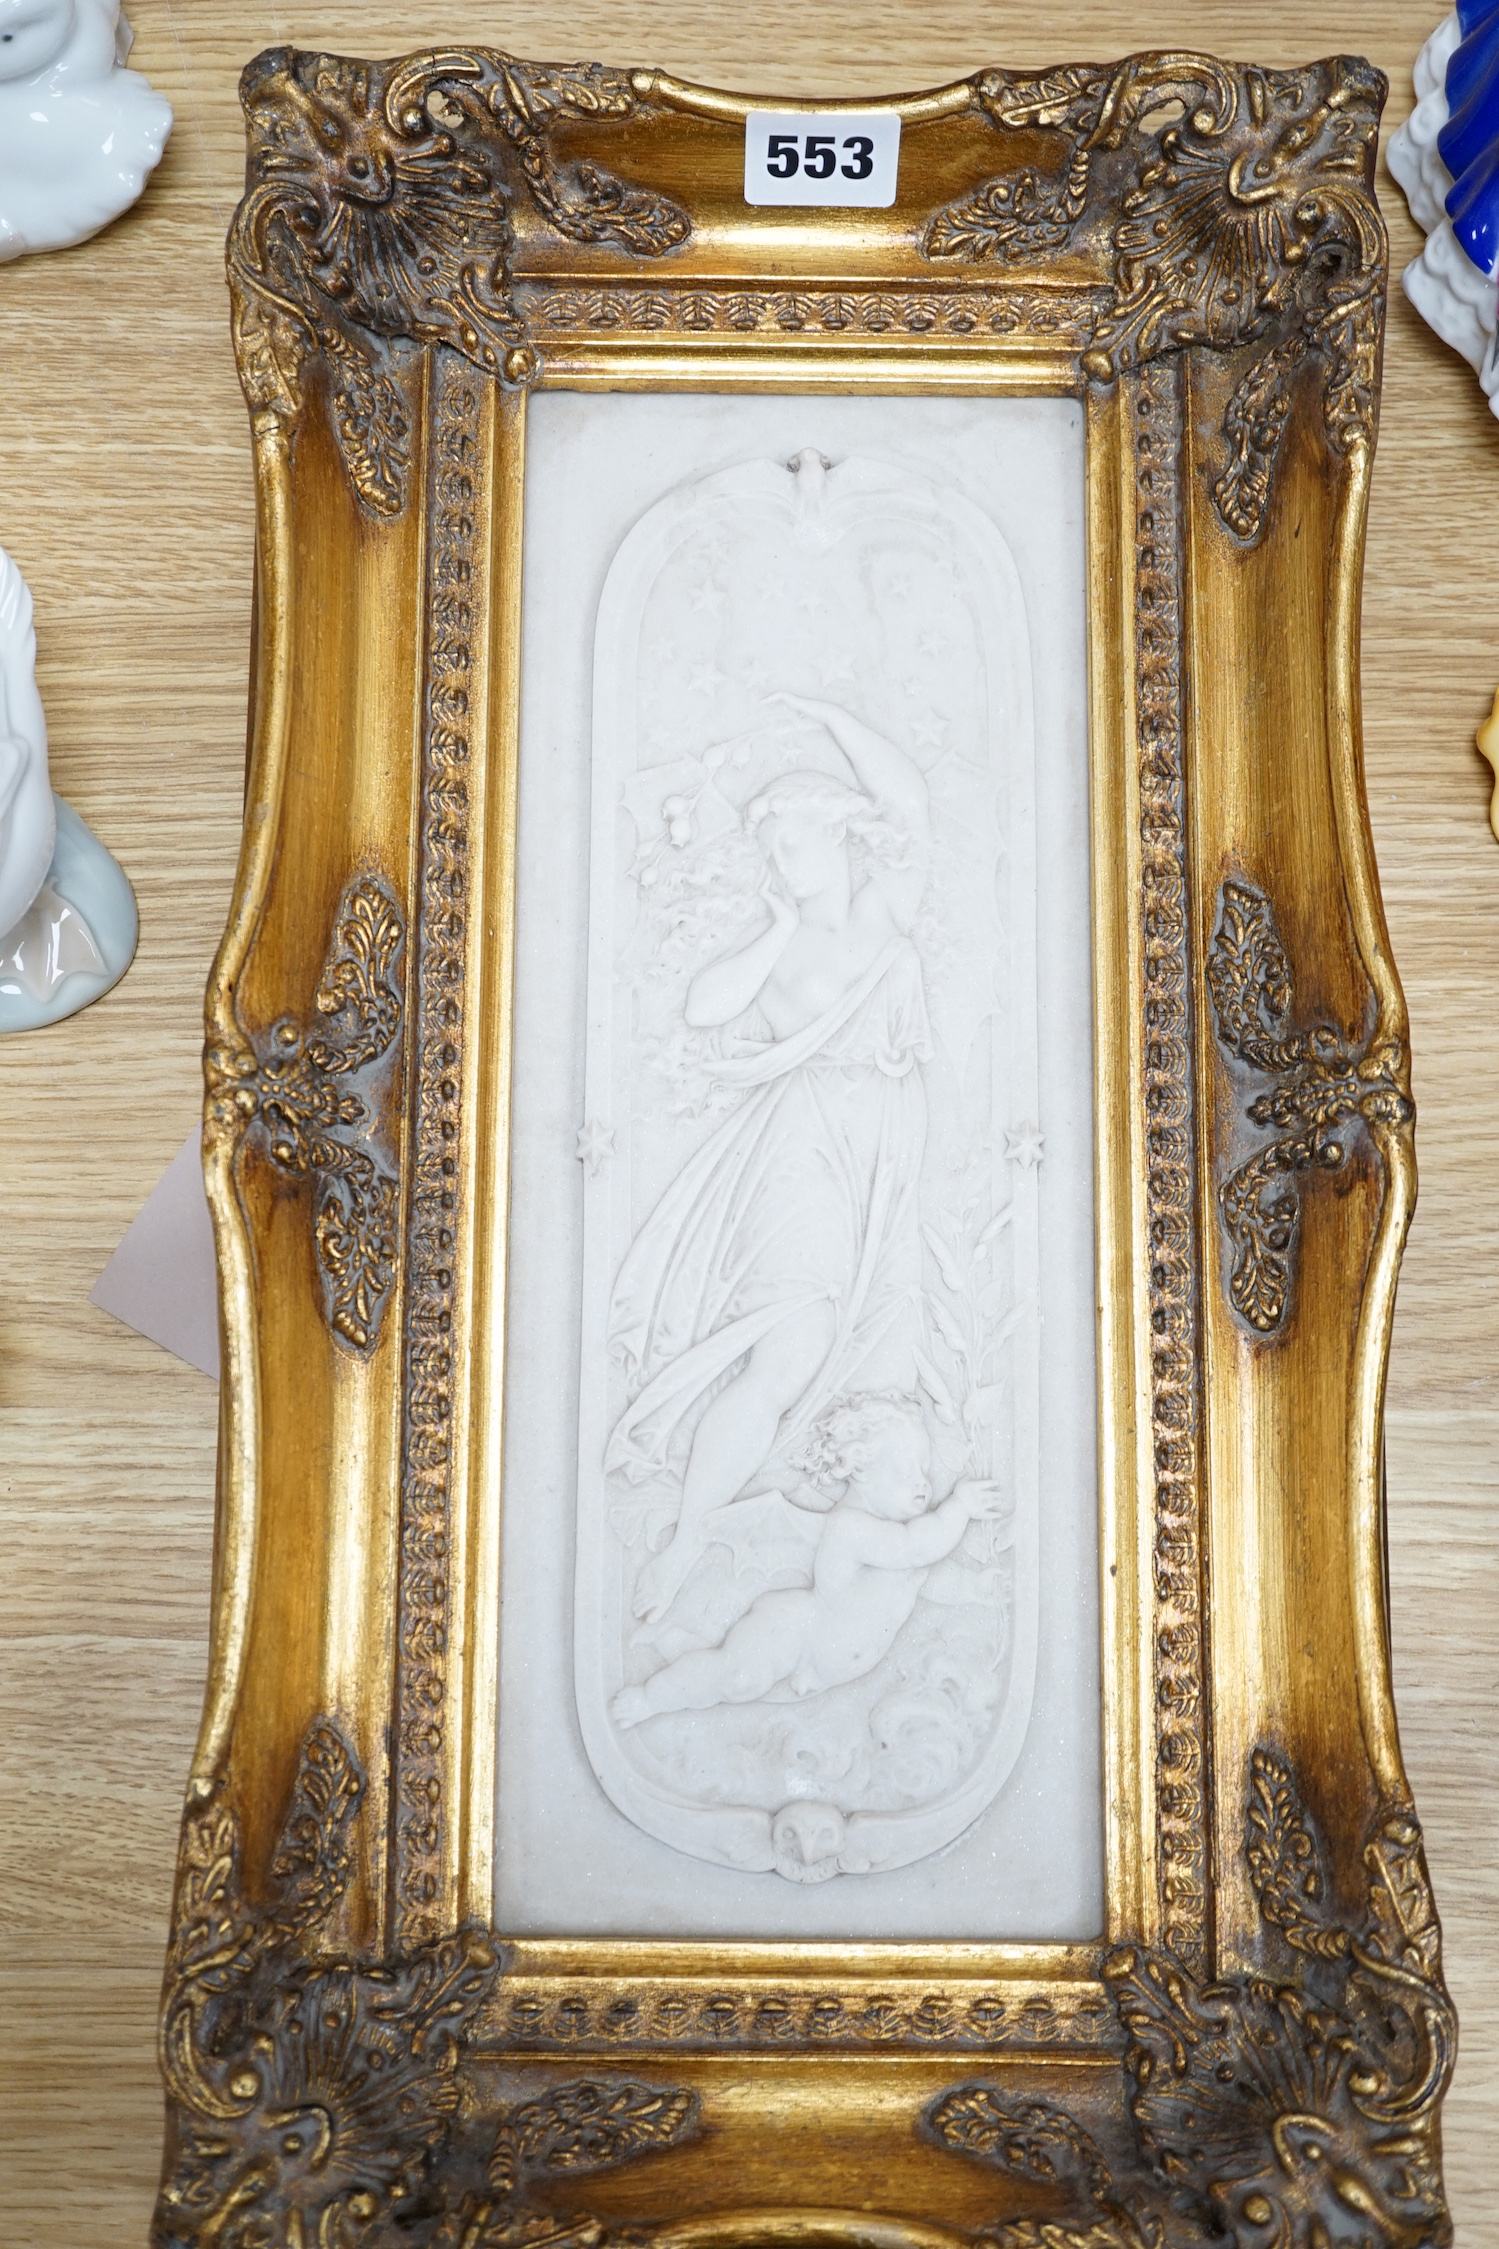 An ornate framed reconstituted stone frieze, 42 x 23cm